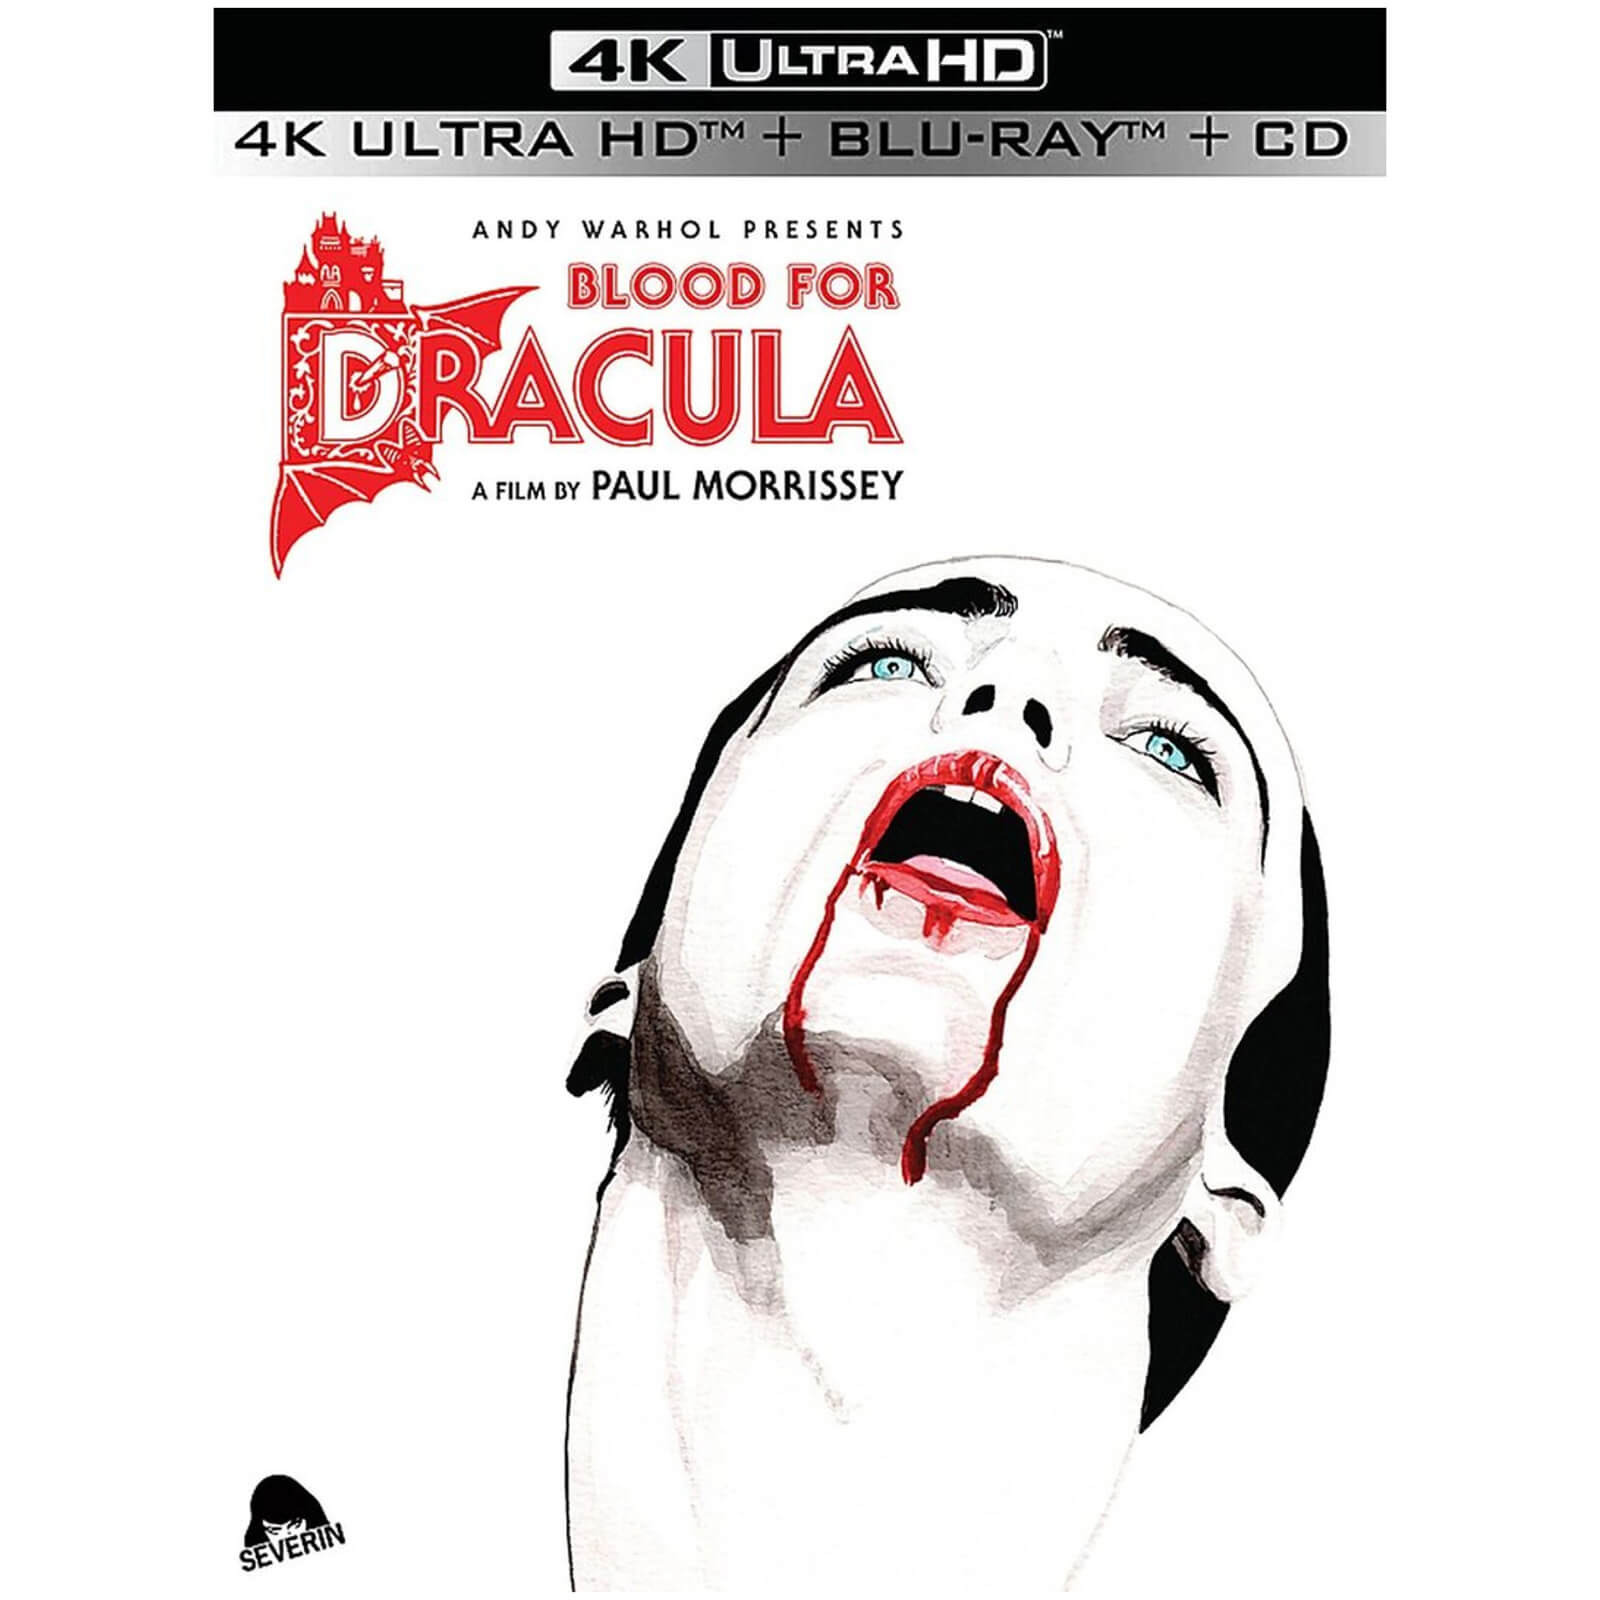 Blood for Dracula - Limited Edition 4K Ultra HD (Includes Blu-ray & CD)